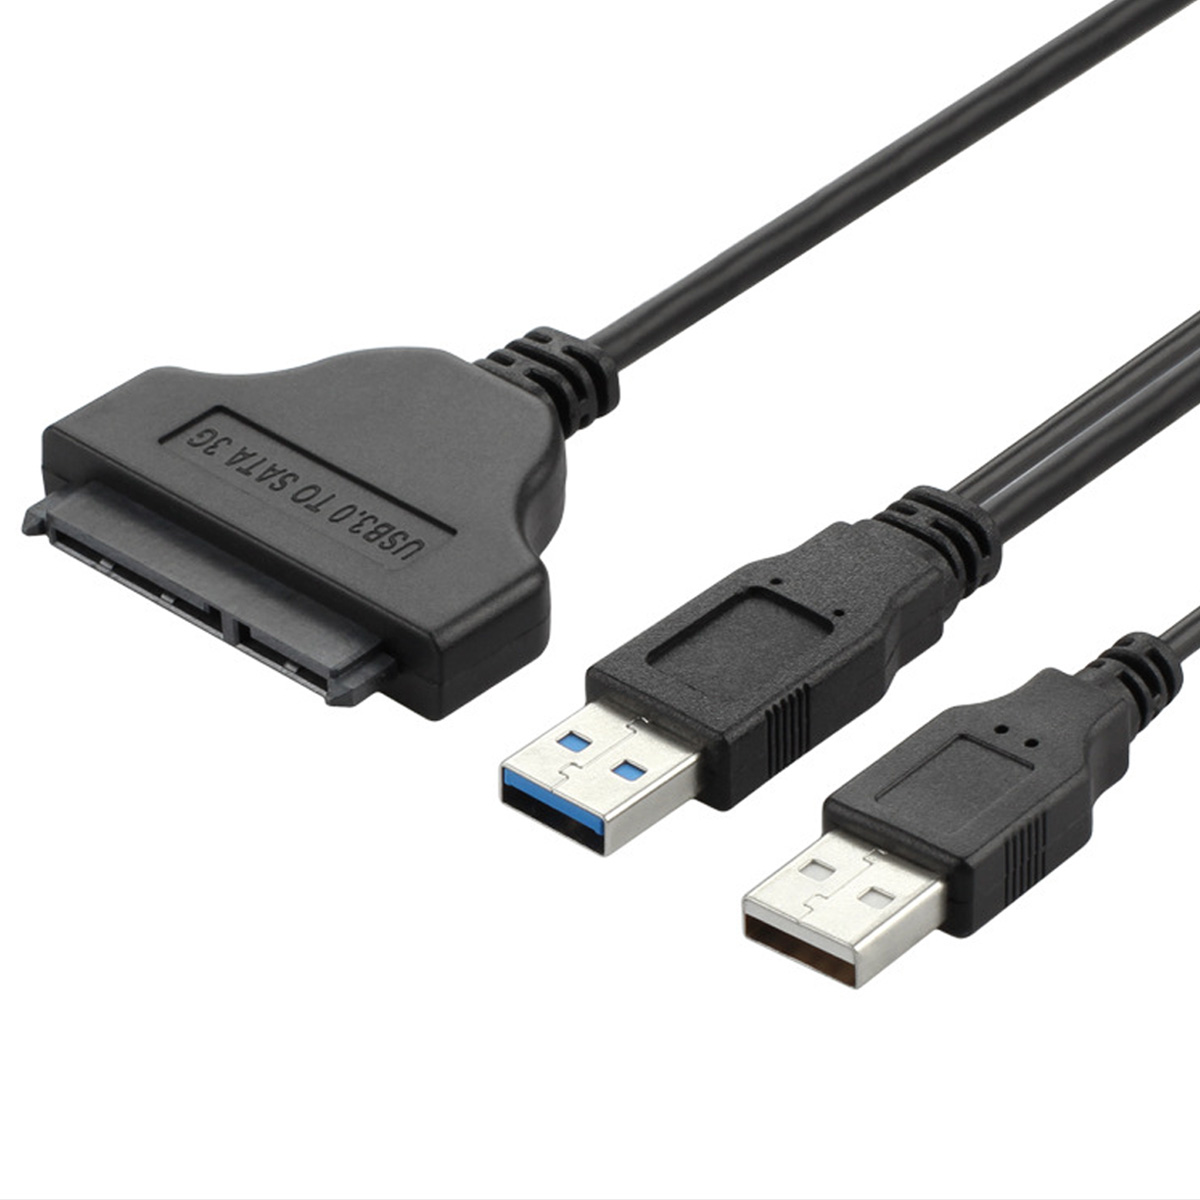 

0.5M USB3.0 To SATA Hard Drive Converter Adapter Cable